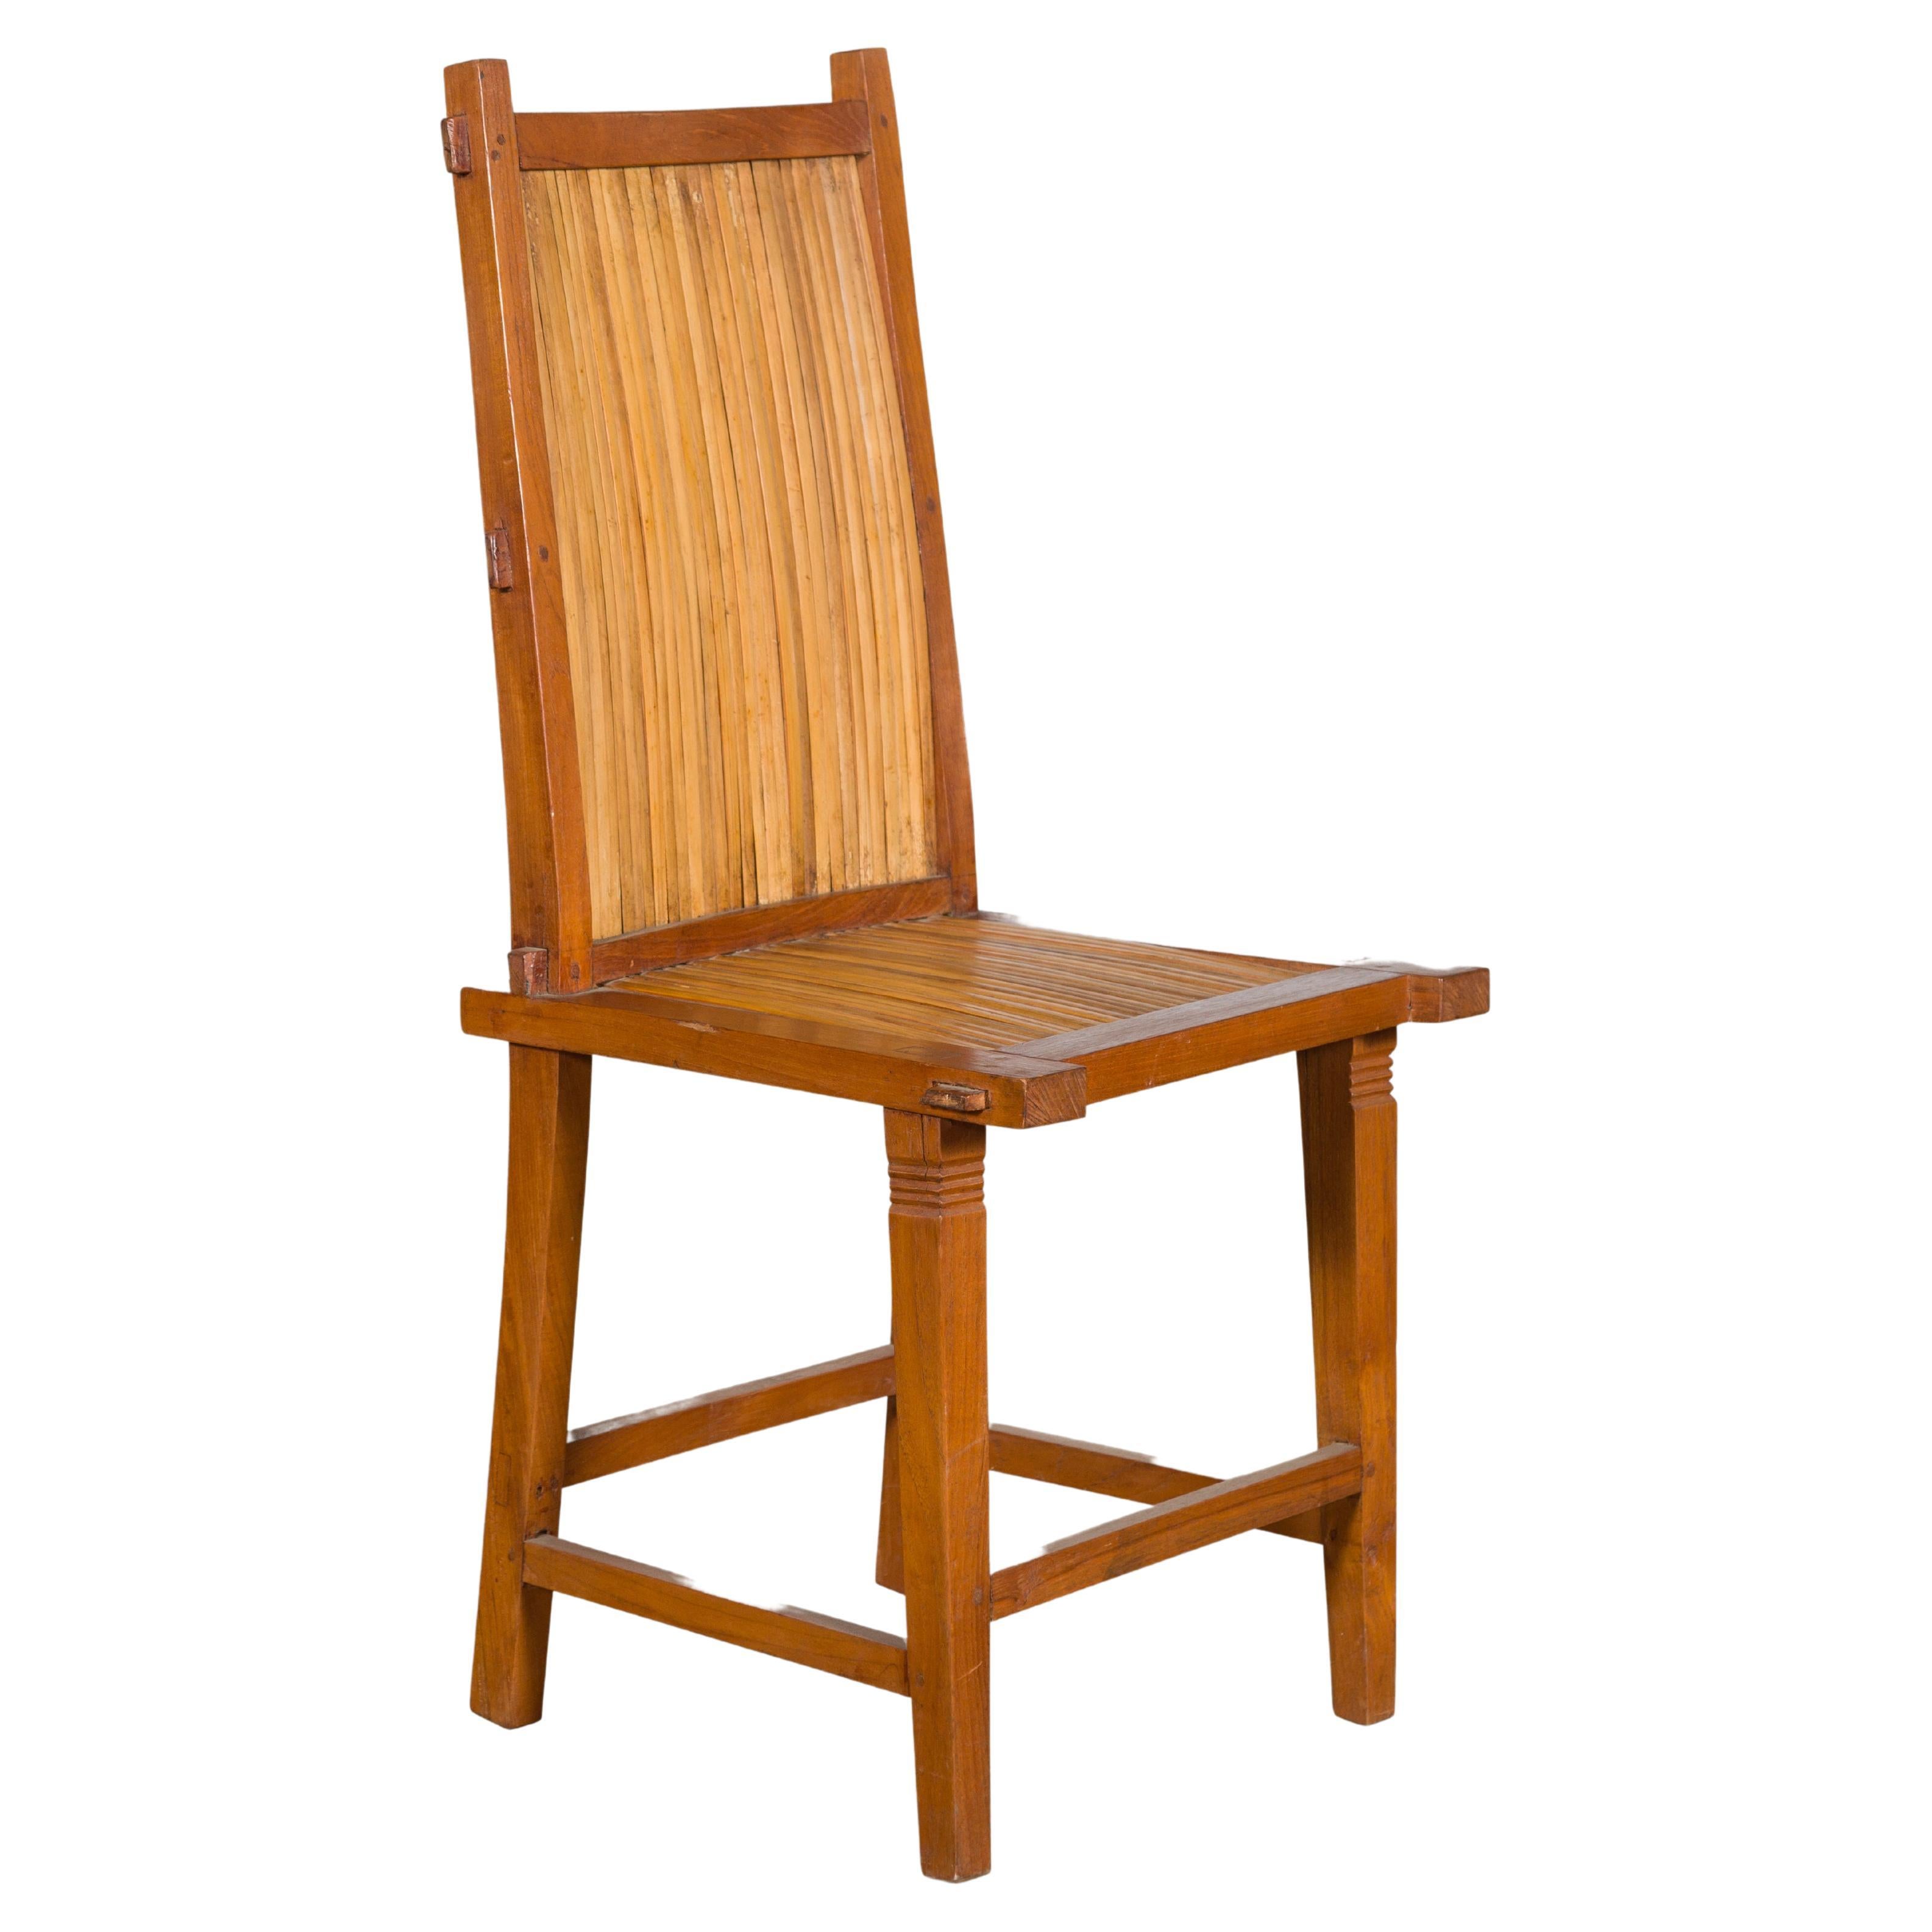 A rustic vintage Javanese side chair from the mid 20th century with slatted bamboo back and seat. Created on the island of Java during the Midcentury period, this side chair features a slanted back made of a wooden frame securing slatted bamboo. The